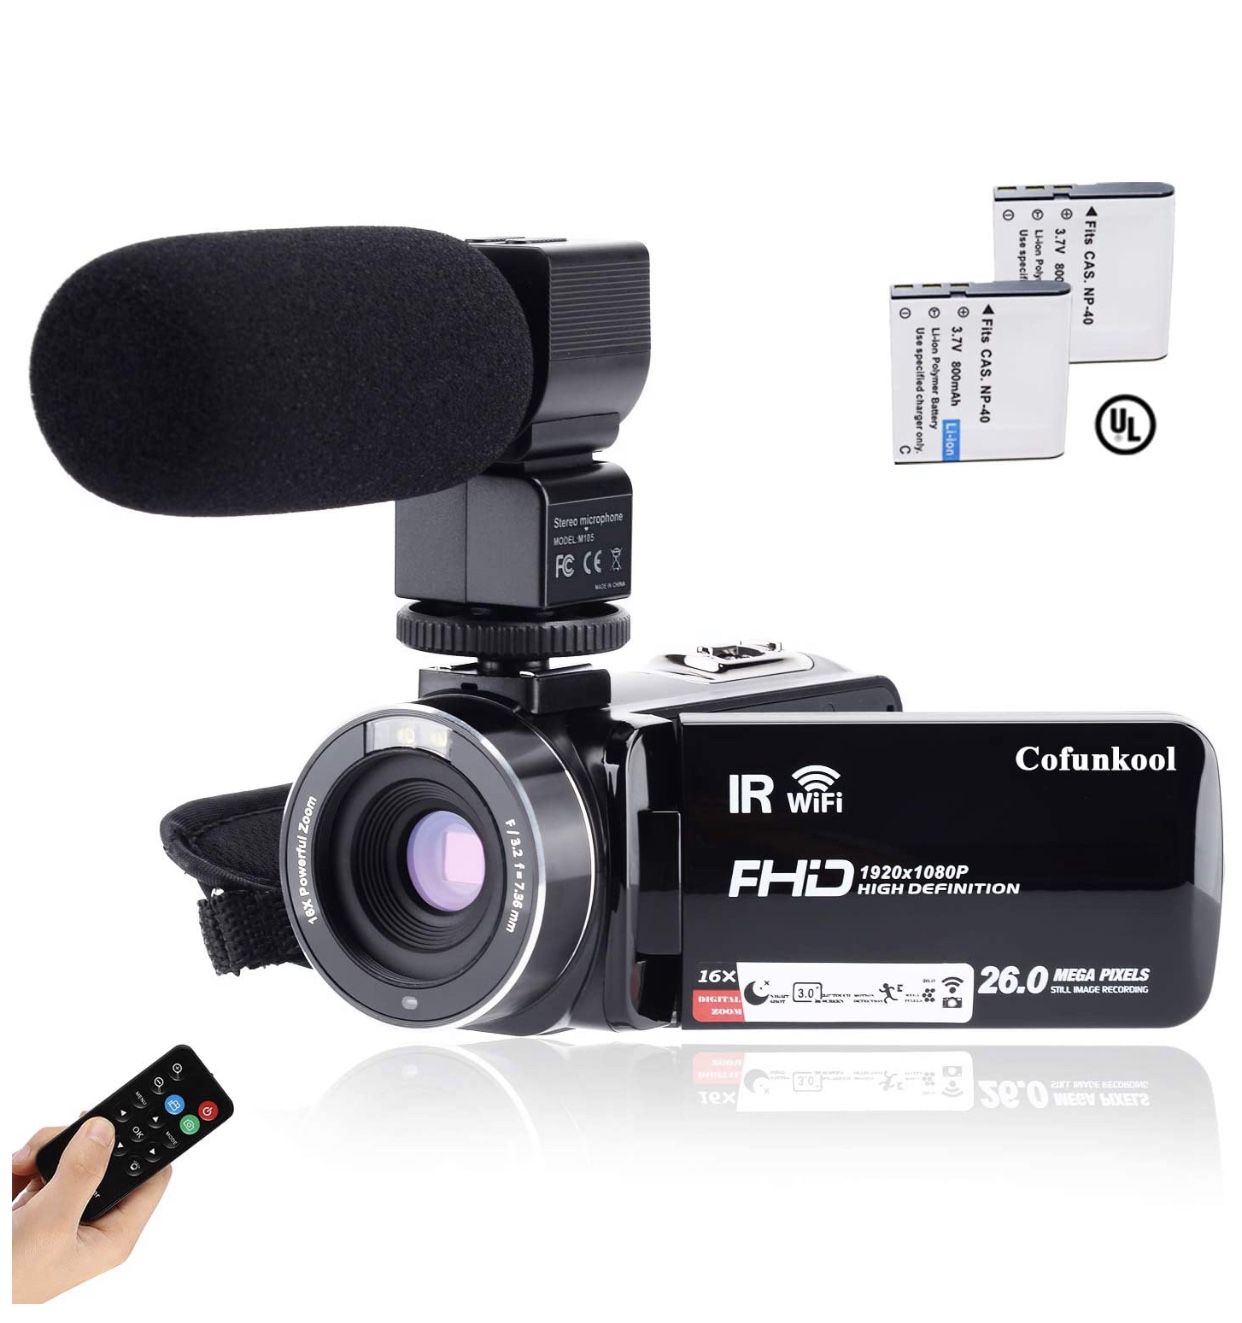 1080P 26MP Video Camera WiFi Vlogging Camera for YouTube, 270° Flipping 3.0" IPS Touch Screen, IR Night Vision